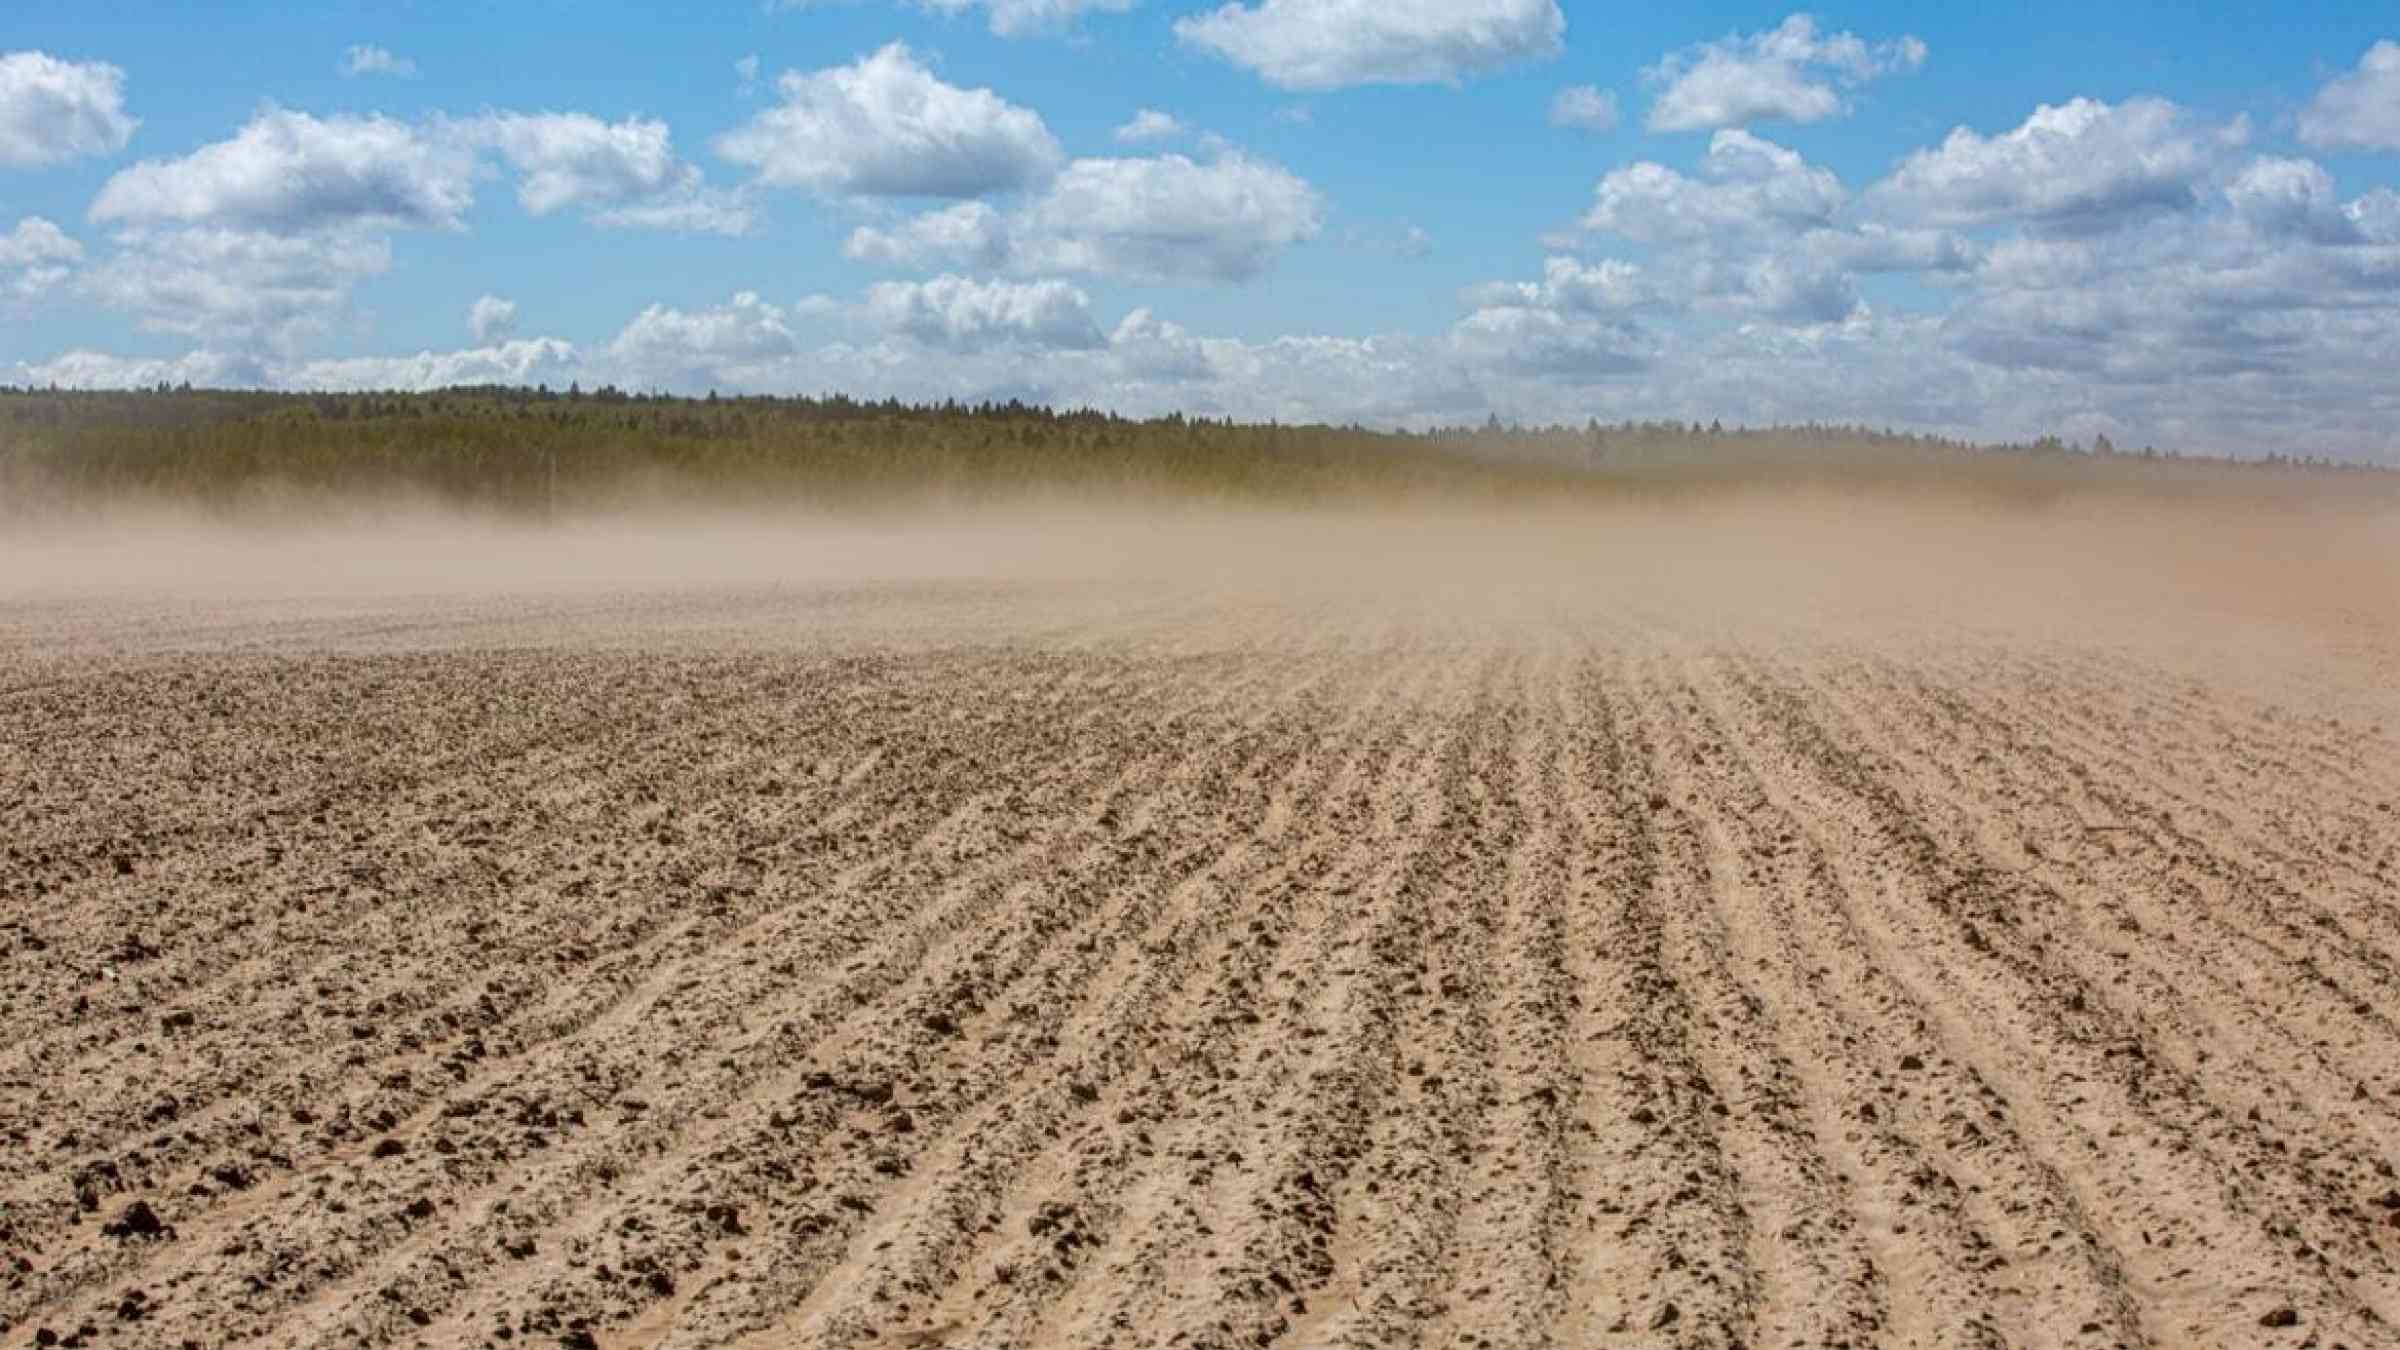 Dust cloud above a dried out field